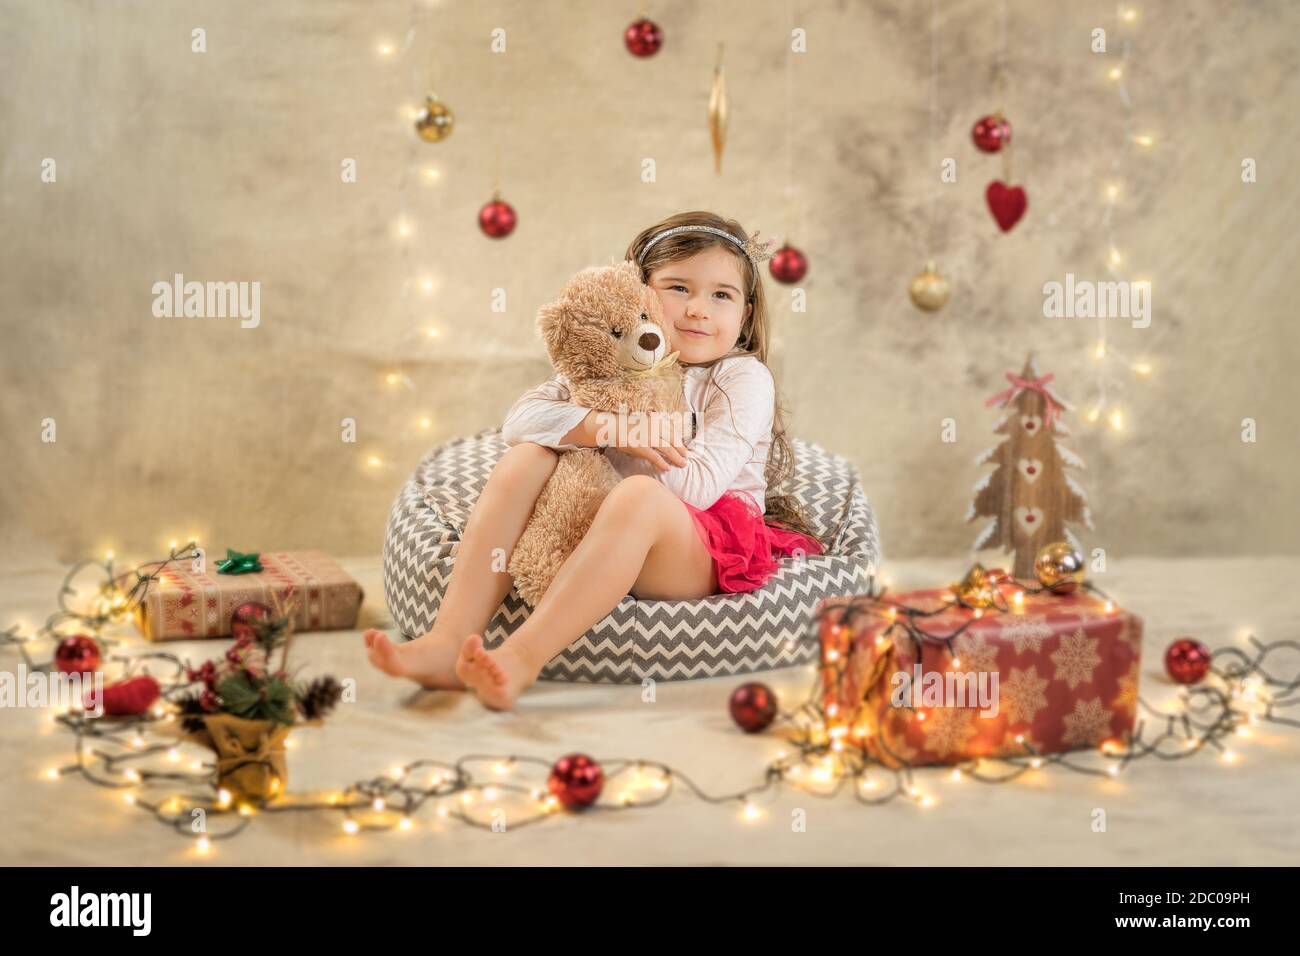 Christmas studio shoot of a cute baby girl that is hugging a teddy bear. Festive, beige background with gifts, Christmas balls and lights Stock Photo